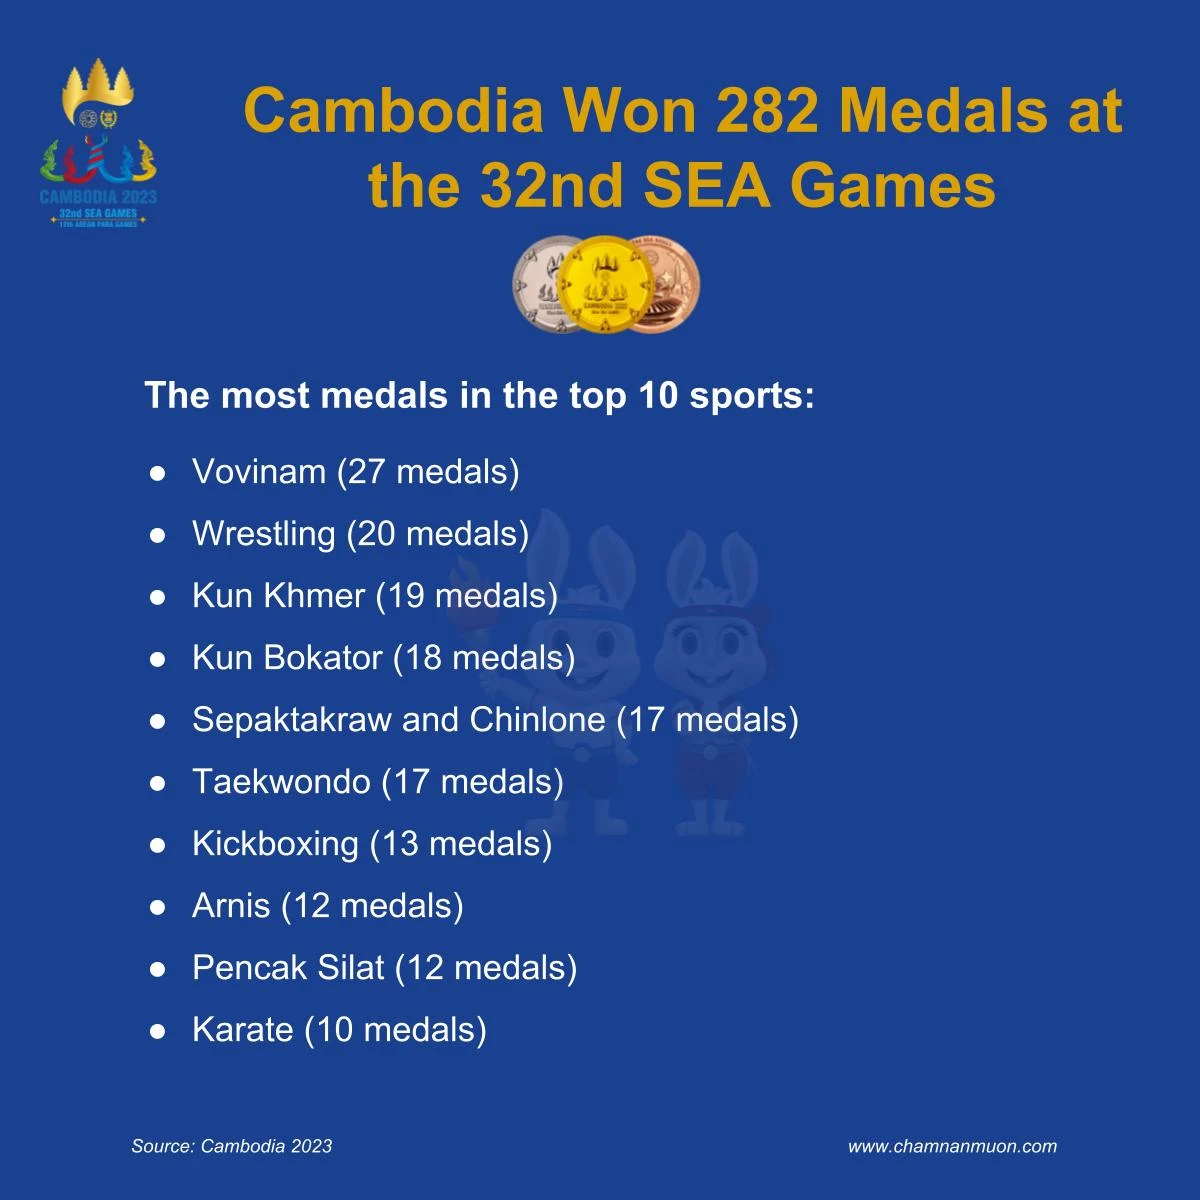 Cambodia's Most medals in the top 10 sports in SEA Games 2023